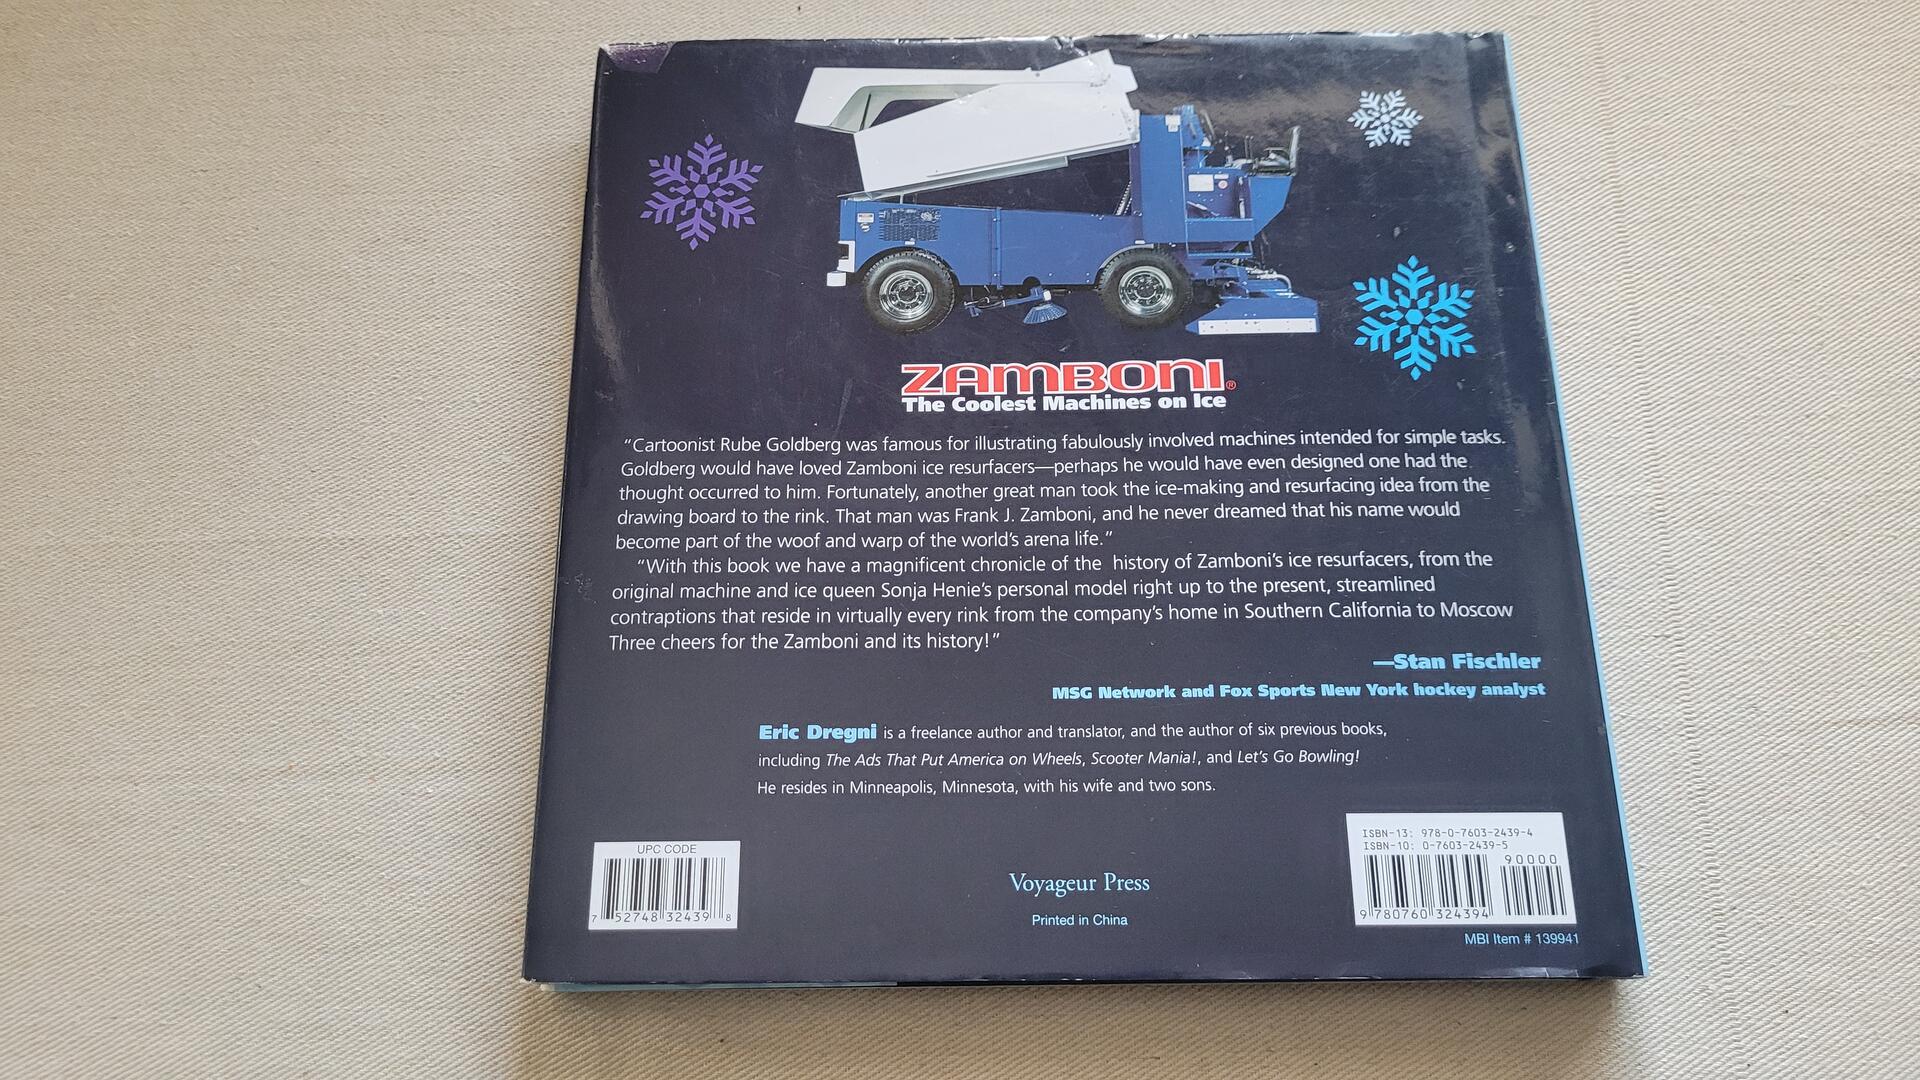 Zamboni: The Coolest Machines on Ice Book by Eric Dregni ISBN 9780760324394 128 pages Quarto Publishing Group USA.